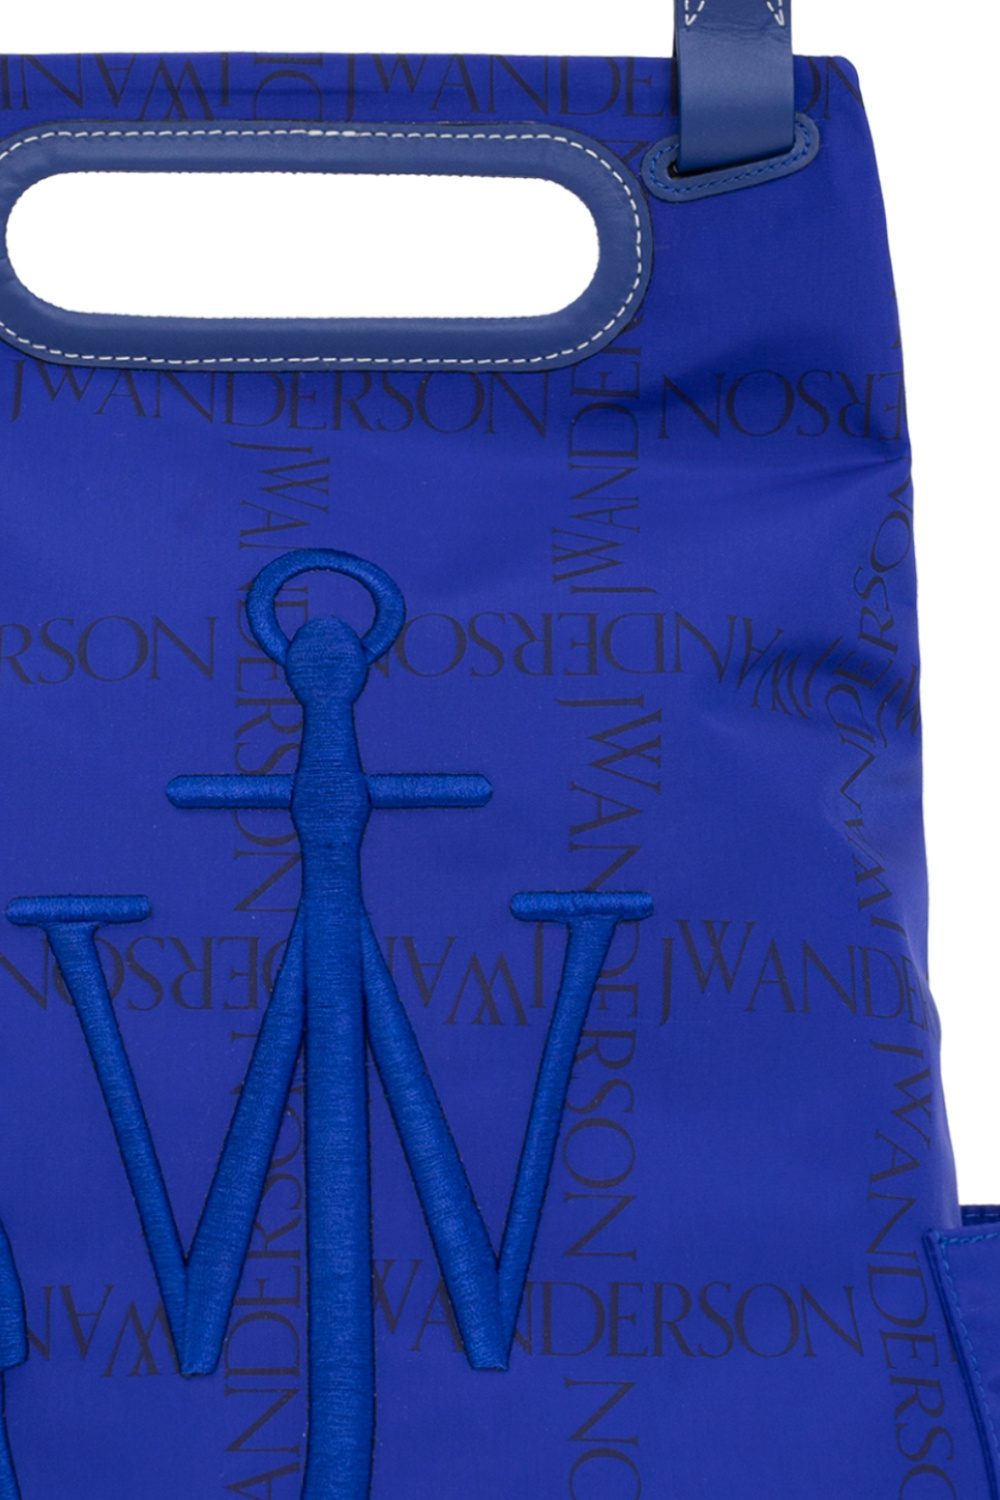 JW Anderson ‘Anchor’ backpack